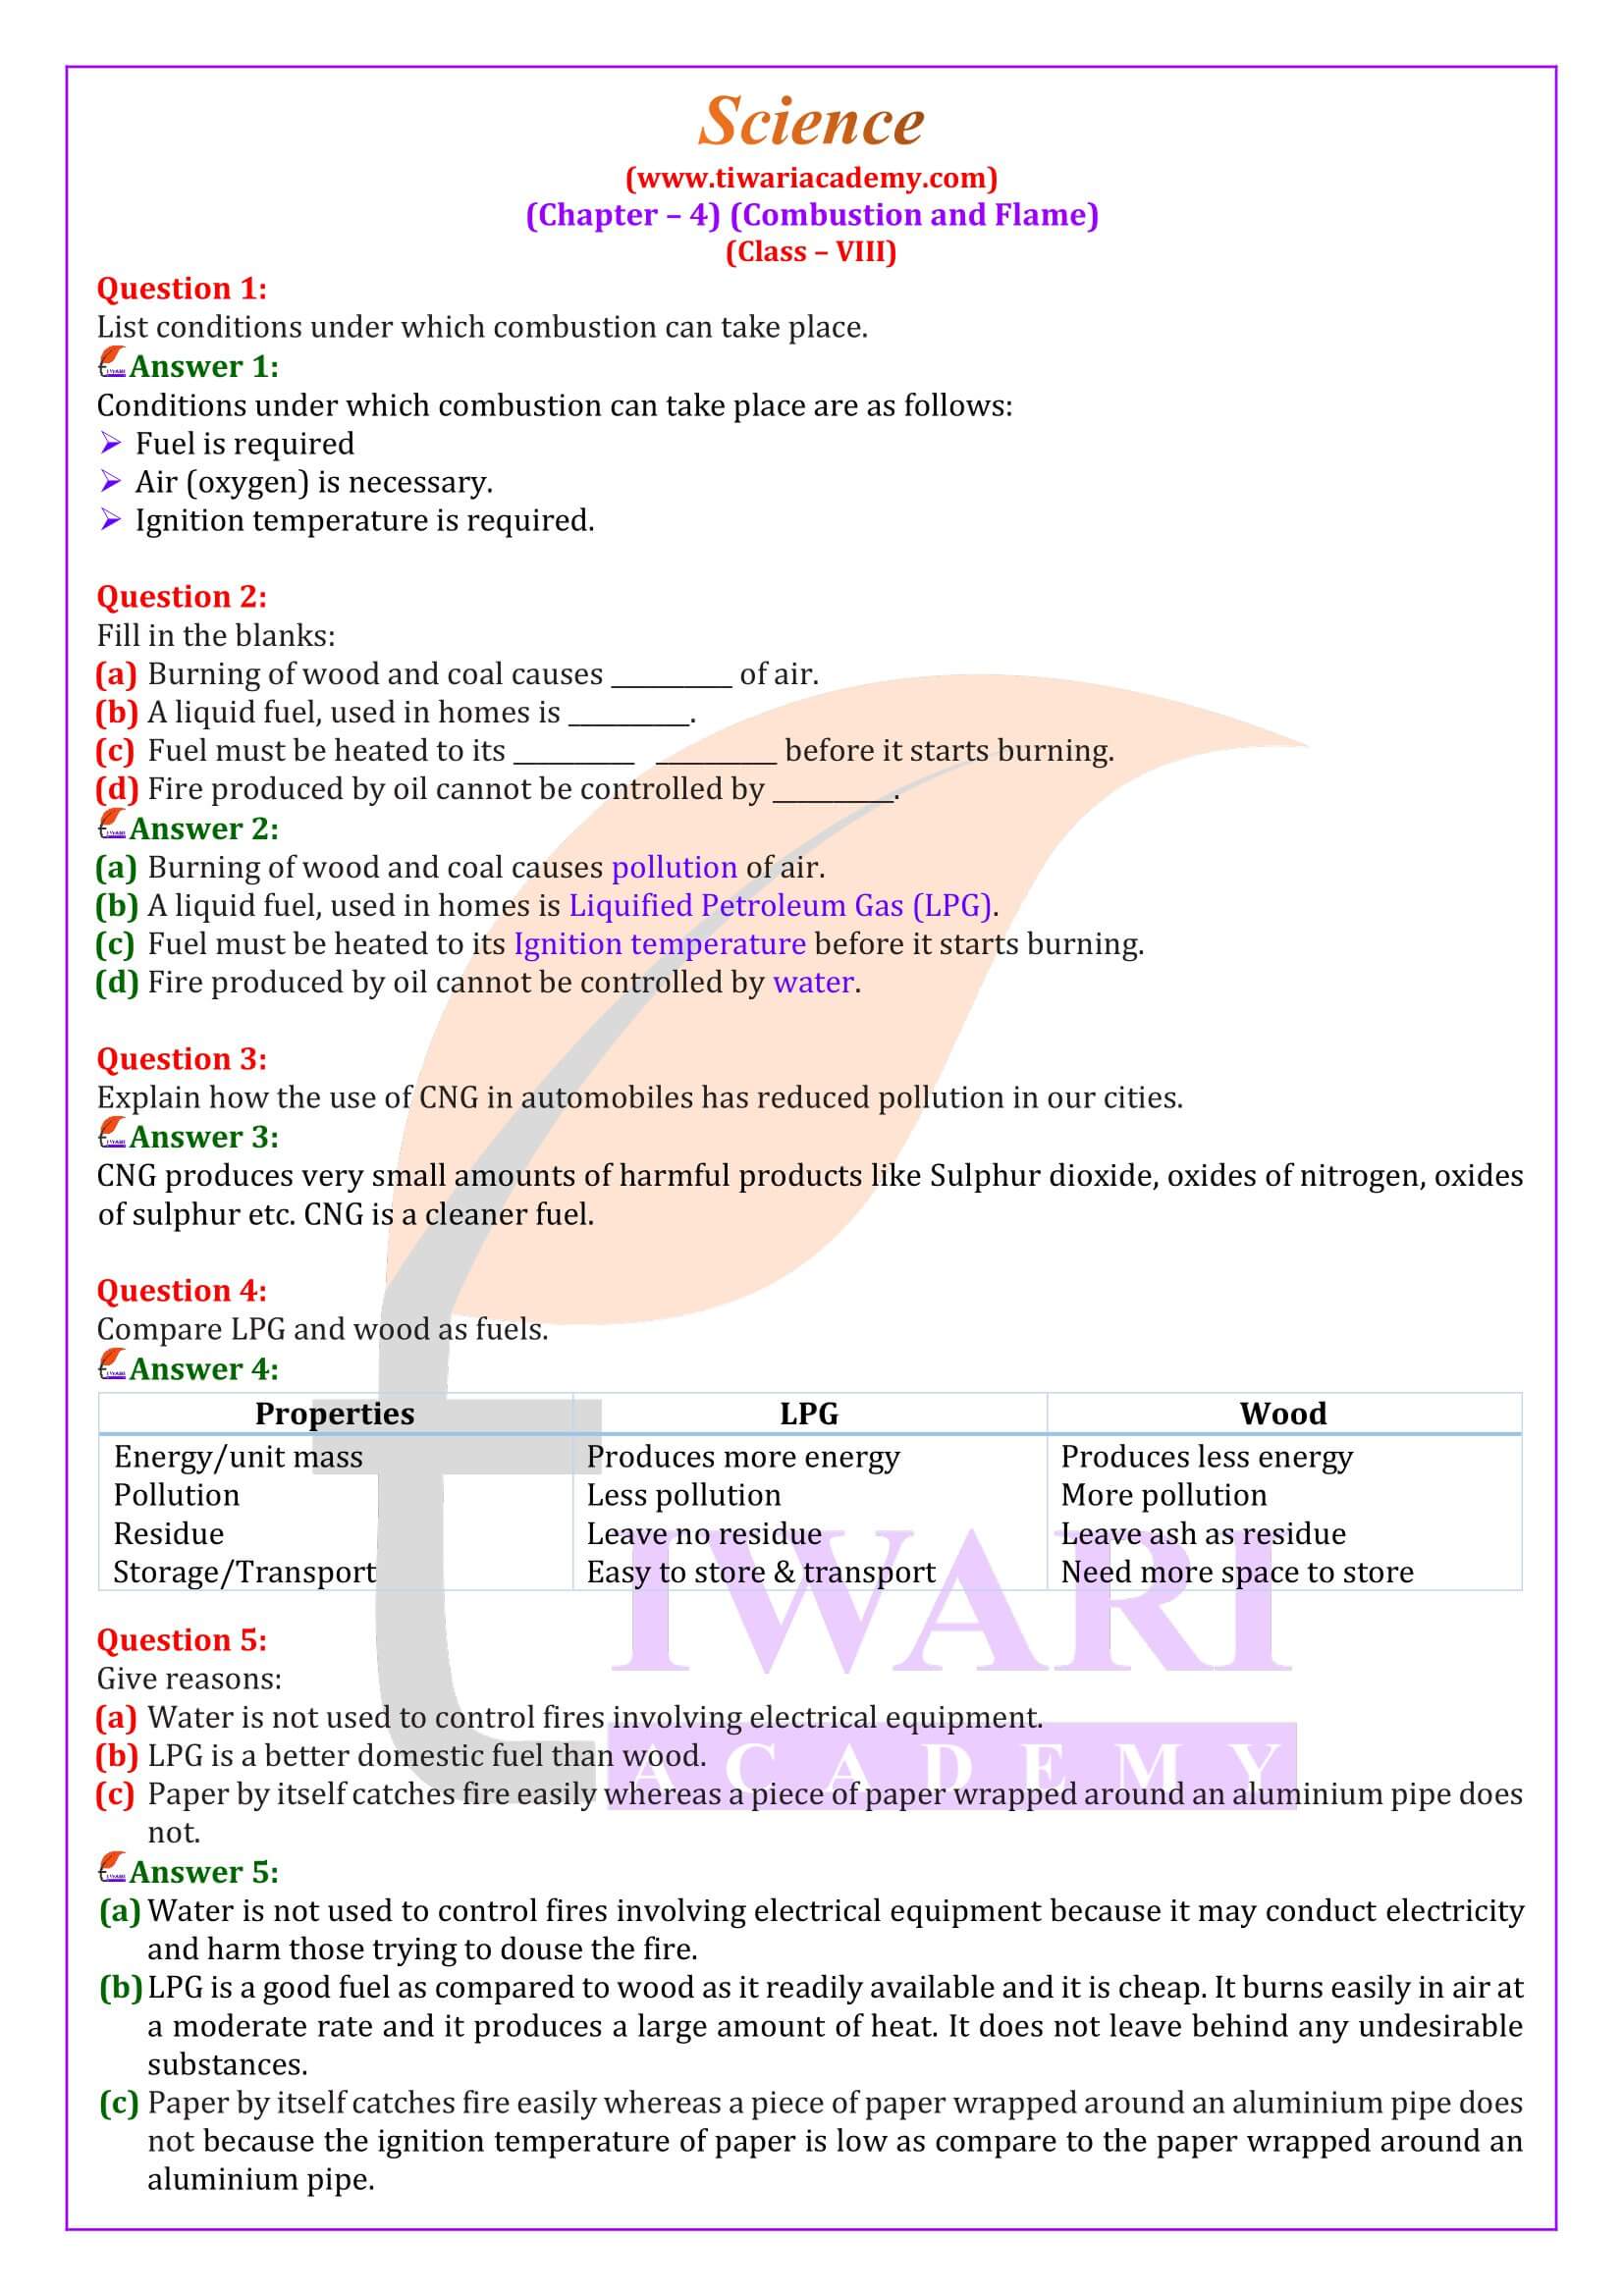 NCERT Solutions for Class 8 Science Chapter 4 in English Medium